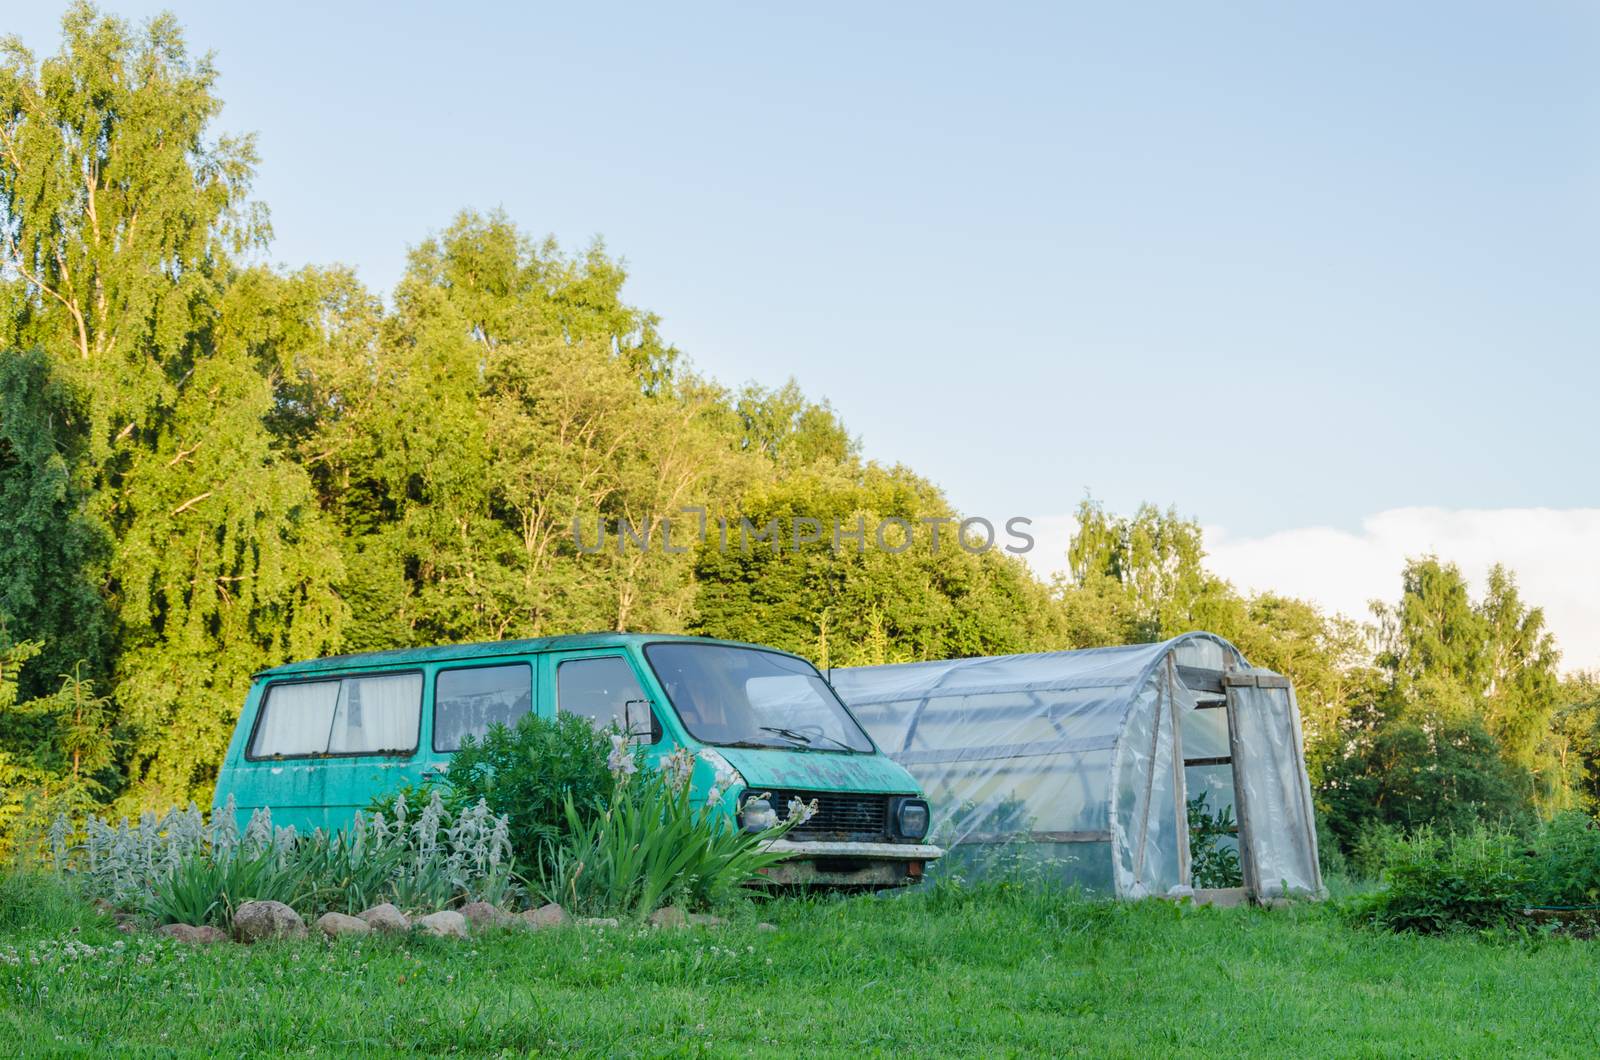 old mini bus parked next to the village greenhouse in the yard